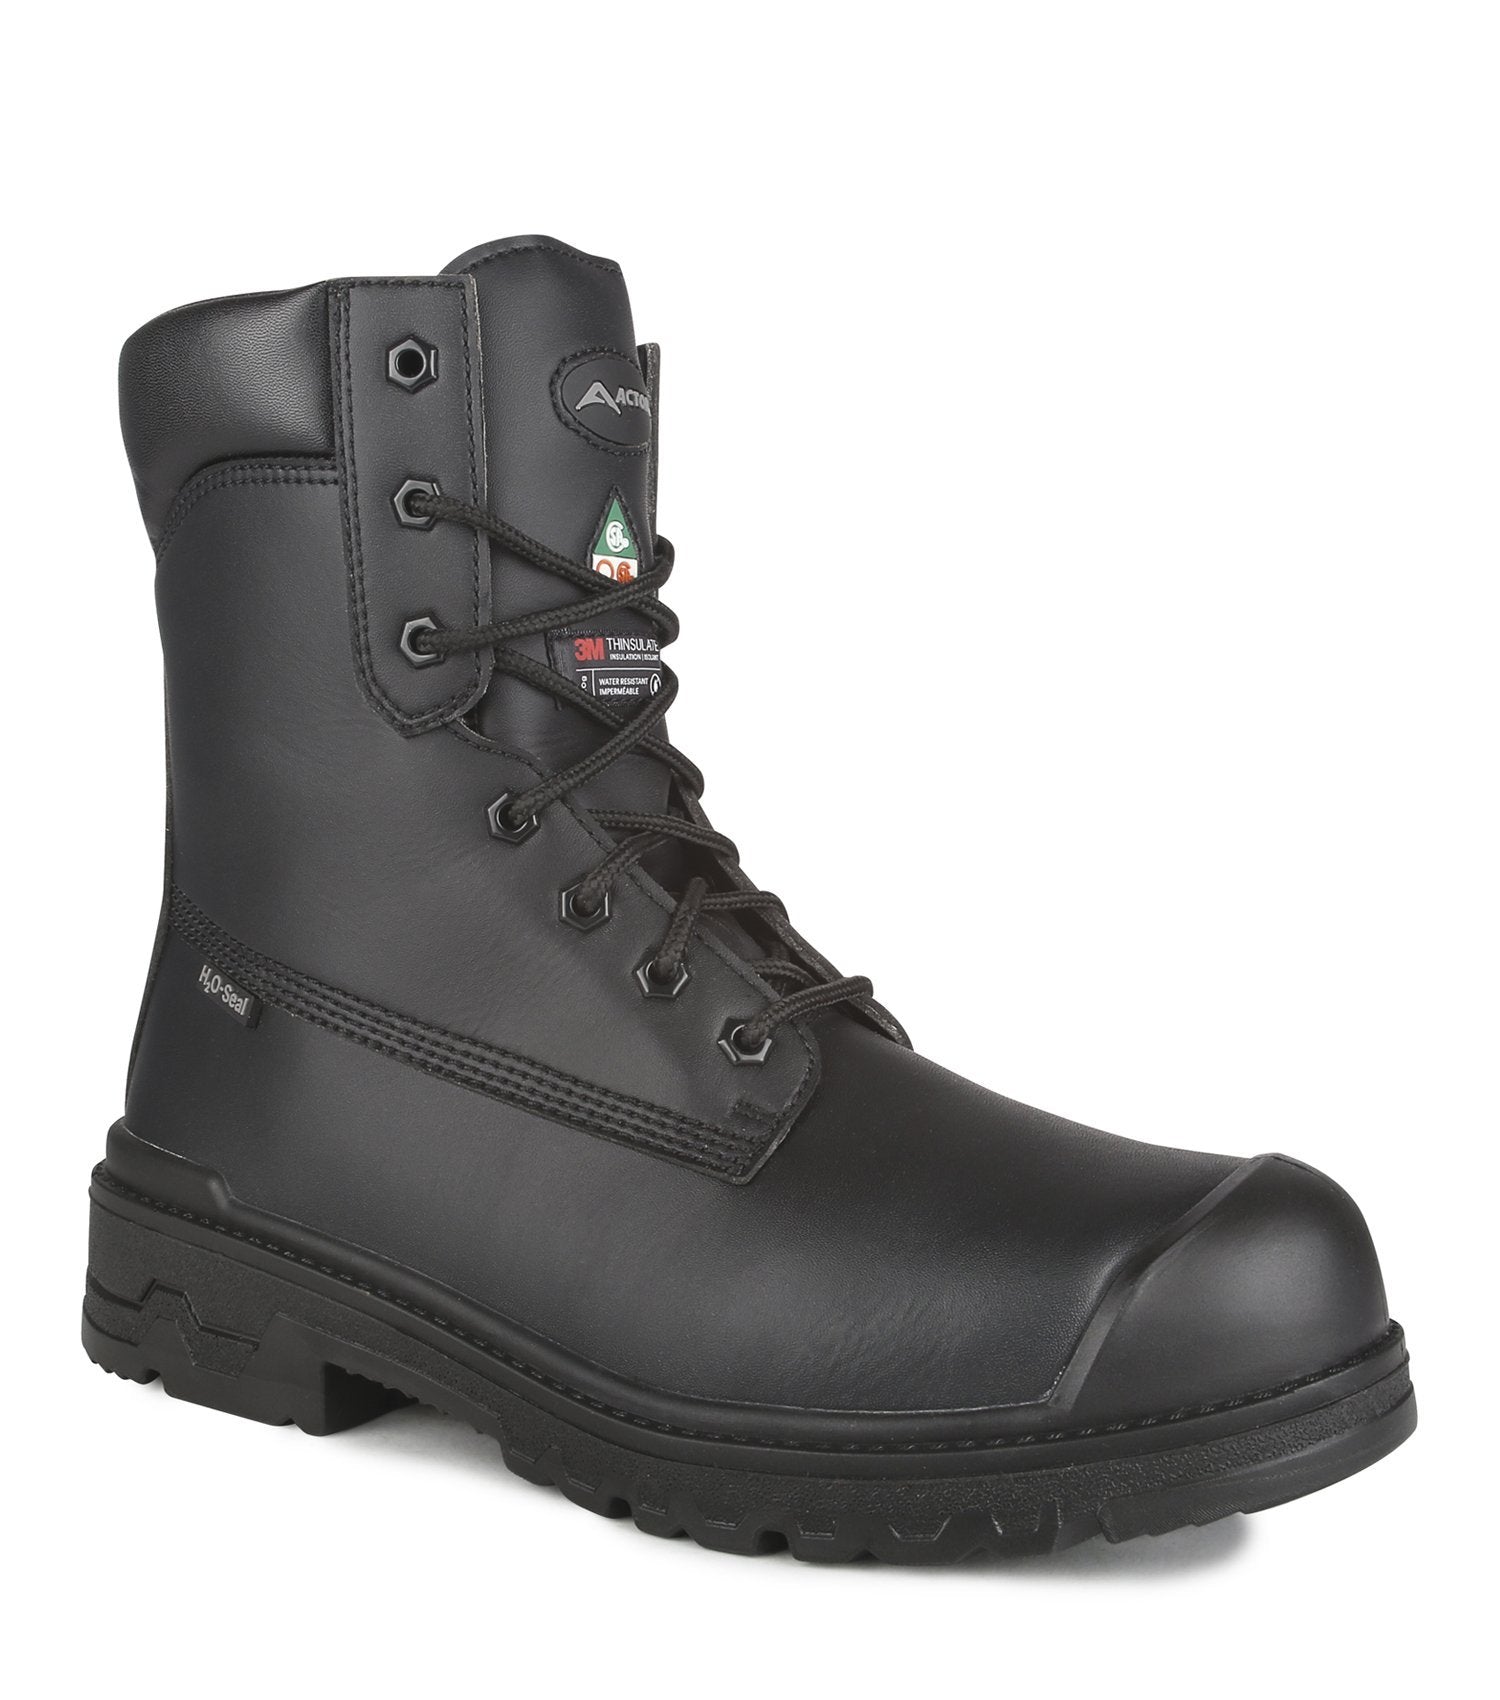 Acton Prospect 8" Chemtech Safety Work Boots | Black | Size 7 to Size 14 Work Boots - Cleanflow